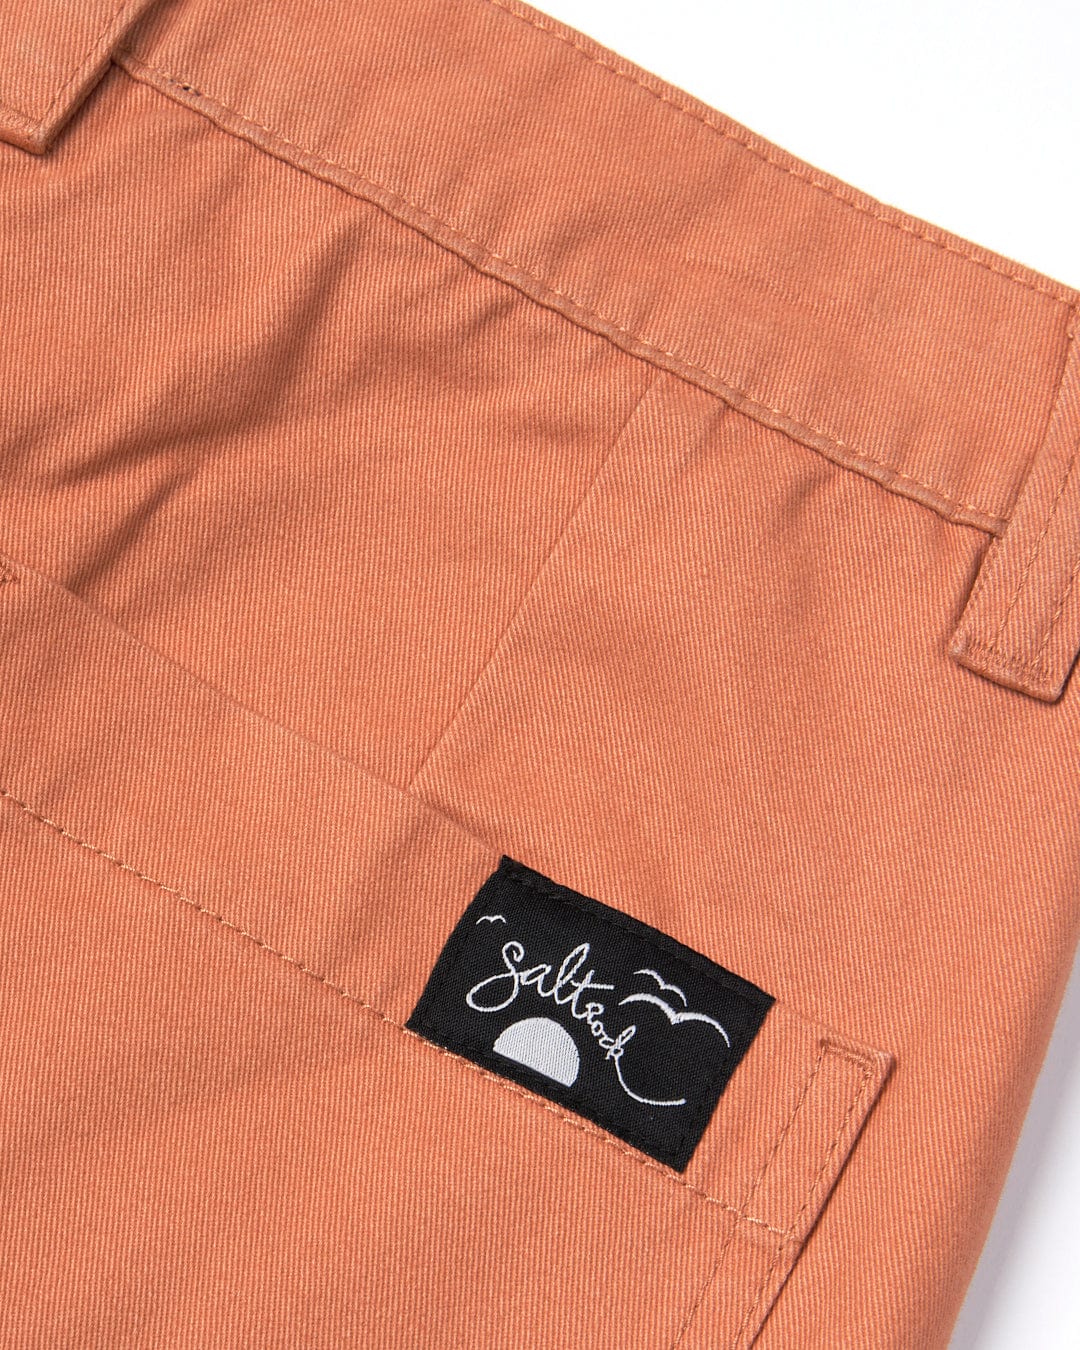 Close-up of a terracotta-colored cotton twill fabric with a black rectangular brand patch labeled "Saltrock" stitched on a pocket.